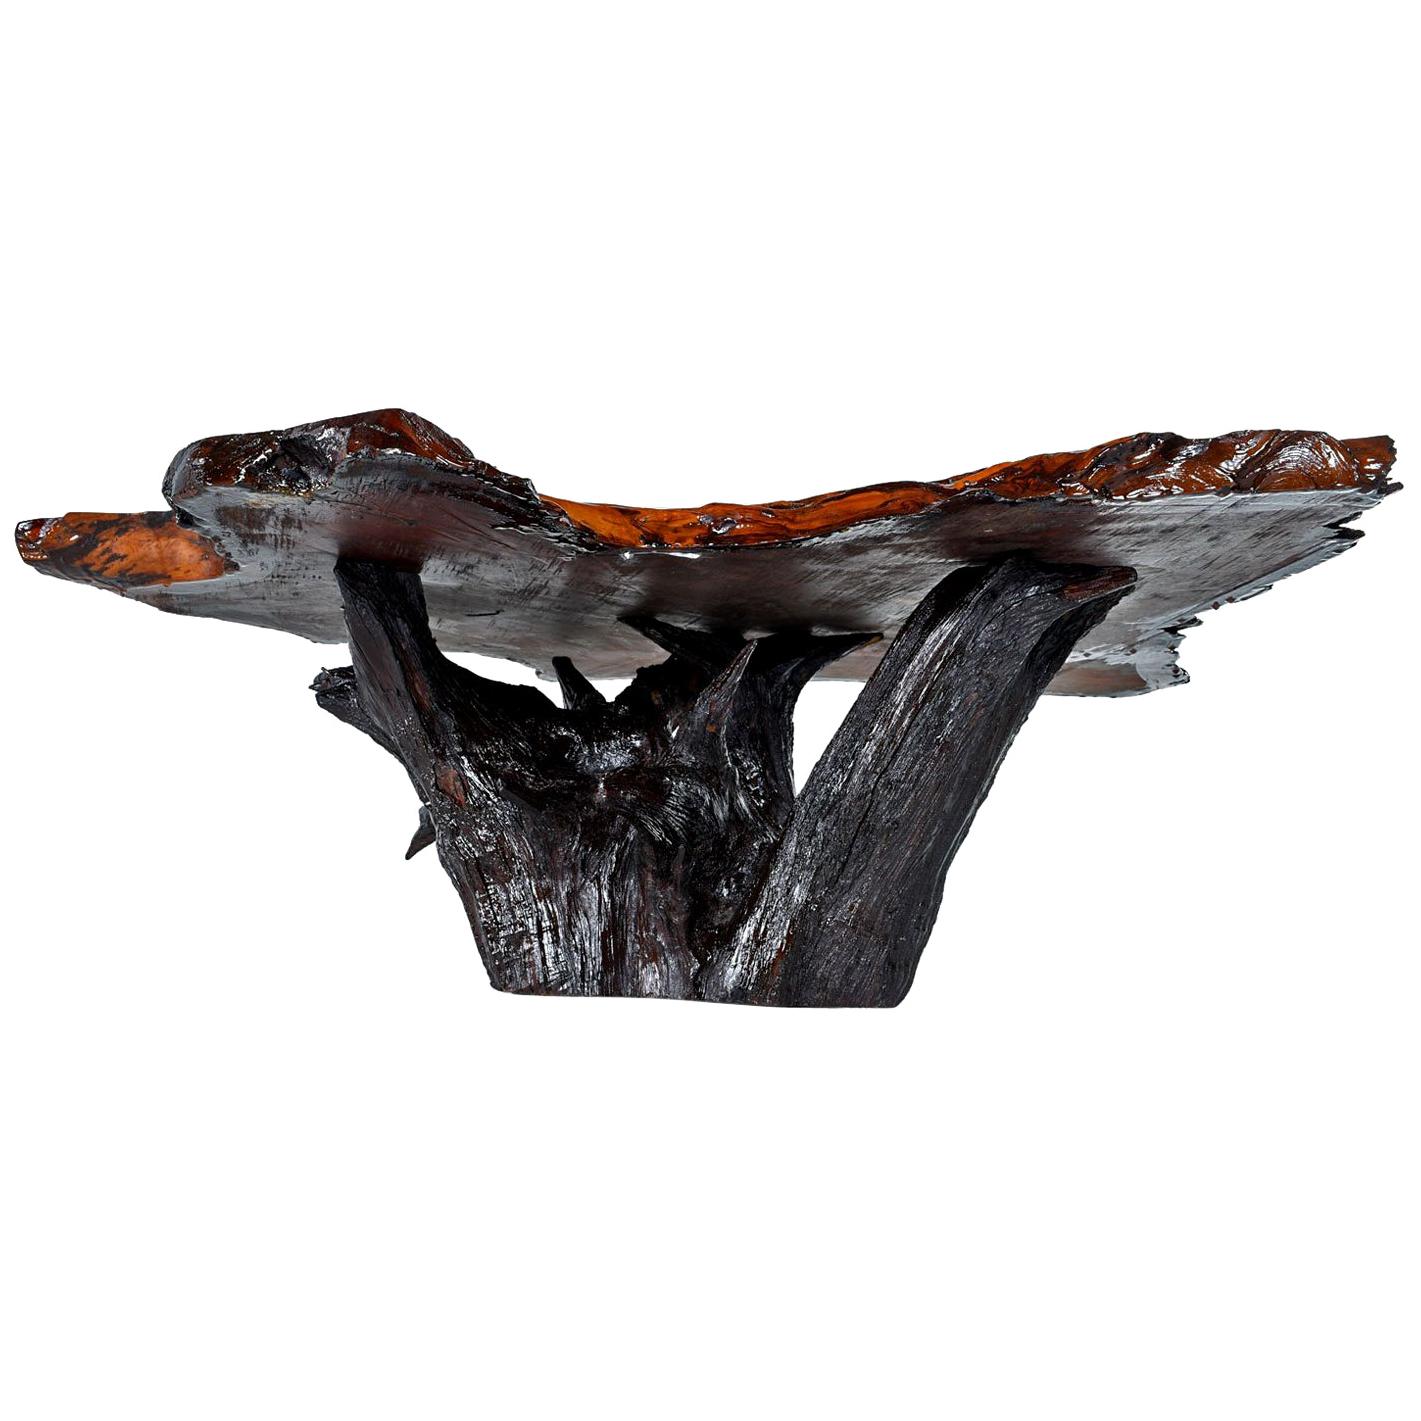 Spectacular vintage live edge cross section slab coffee table. The table has been restored with a newly poured scratch free resin surface. The naturally formed cavities have smoothed over like glass. The edges are raw, unaltered by man. The rugged,